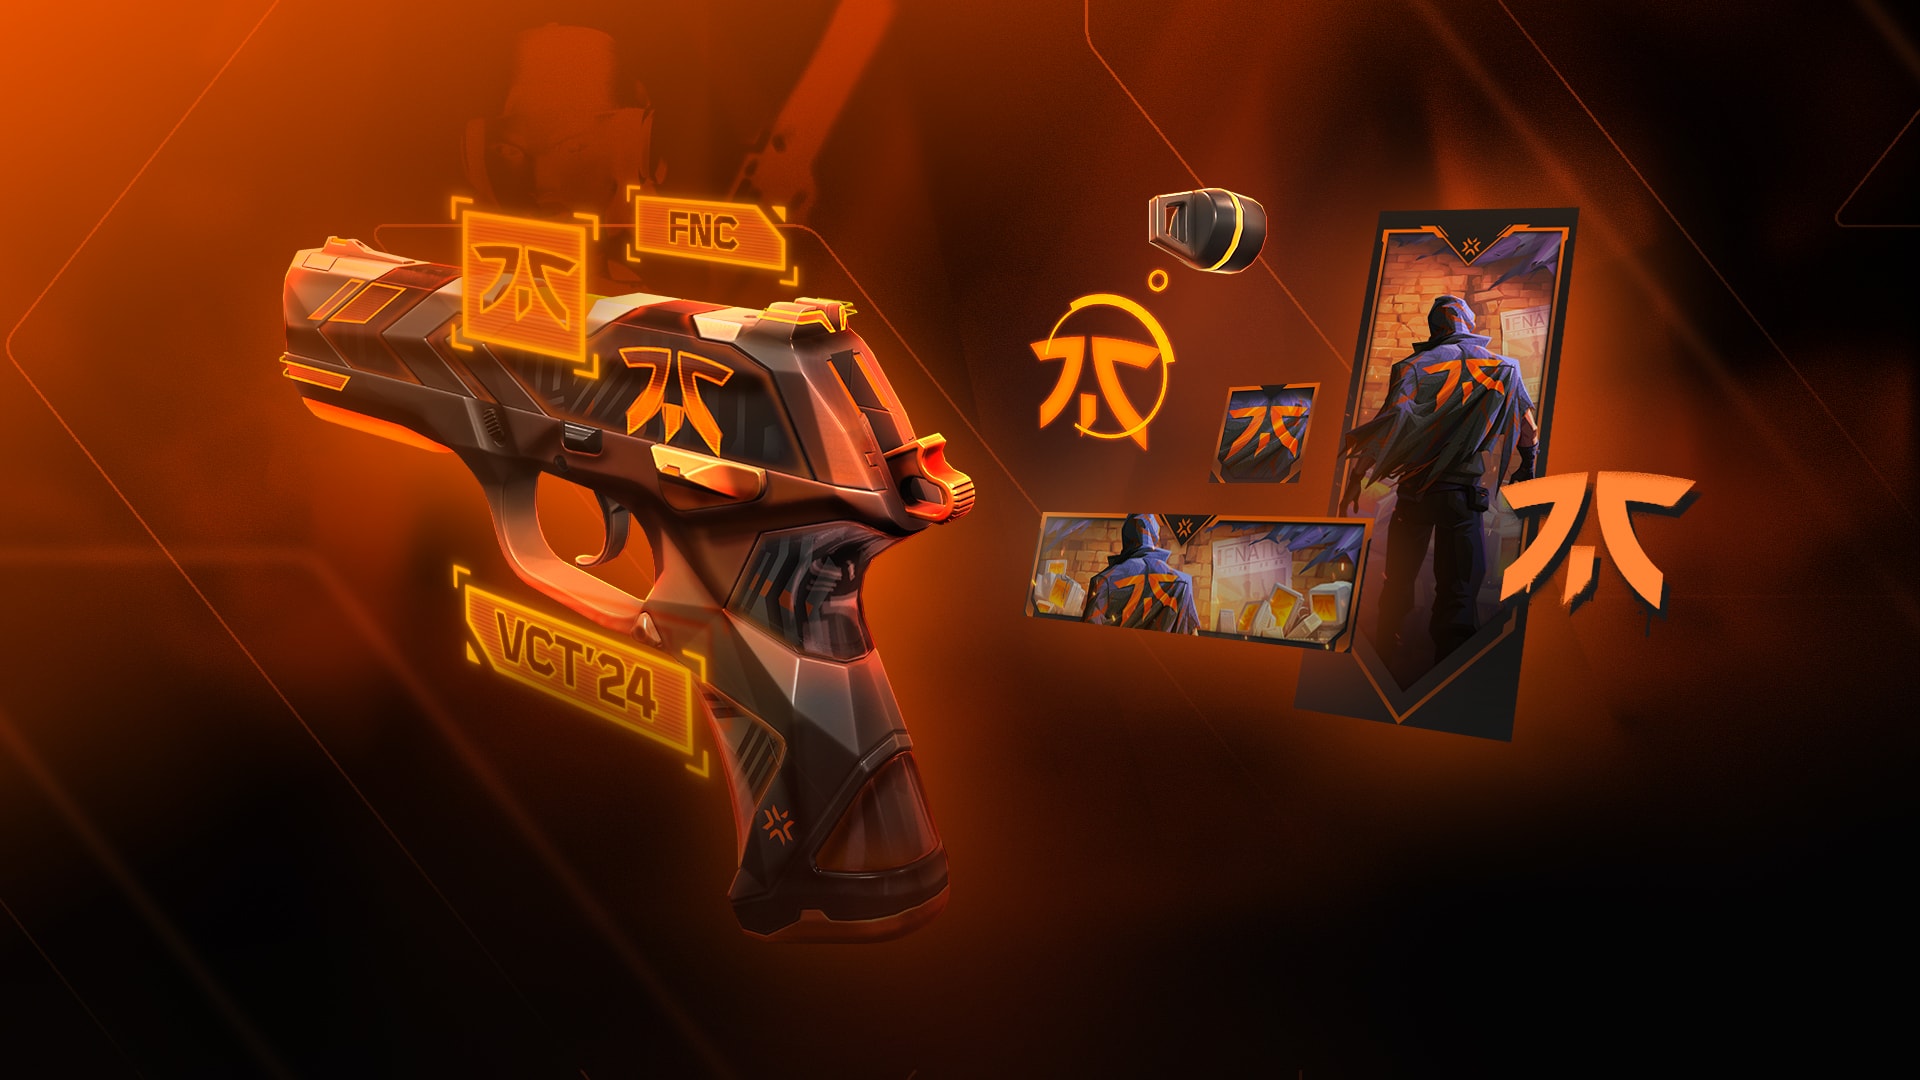 Fnatic VCT 2024 Team Capsule contents featuring a pistol skin, player card, player banner, and player icon